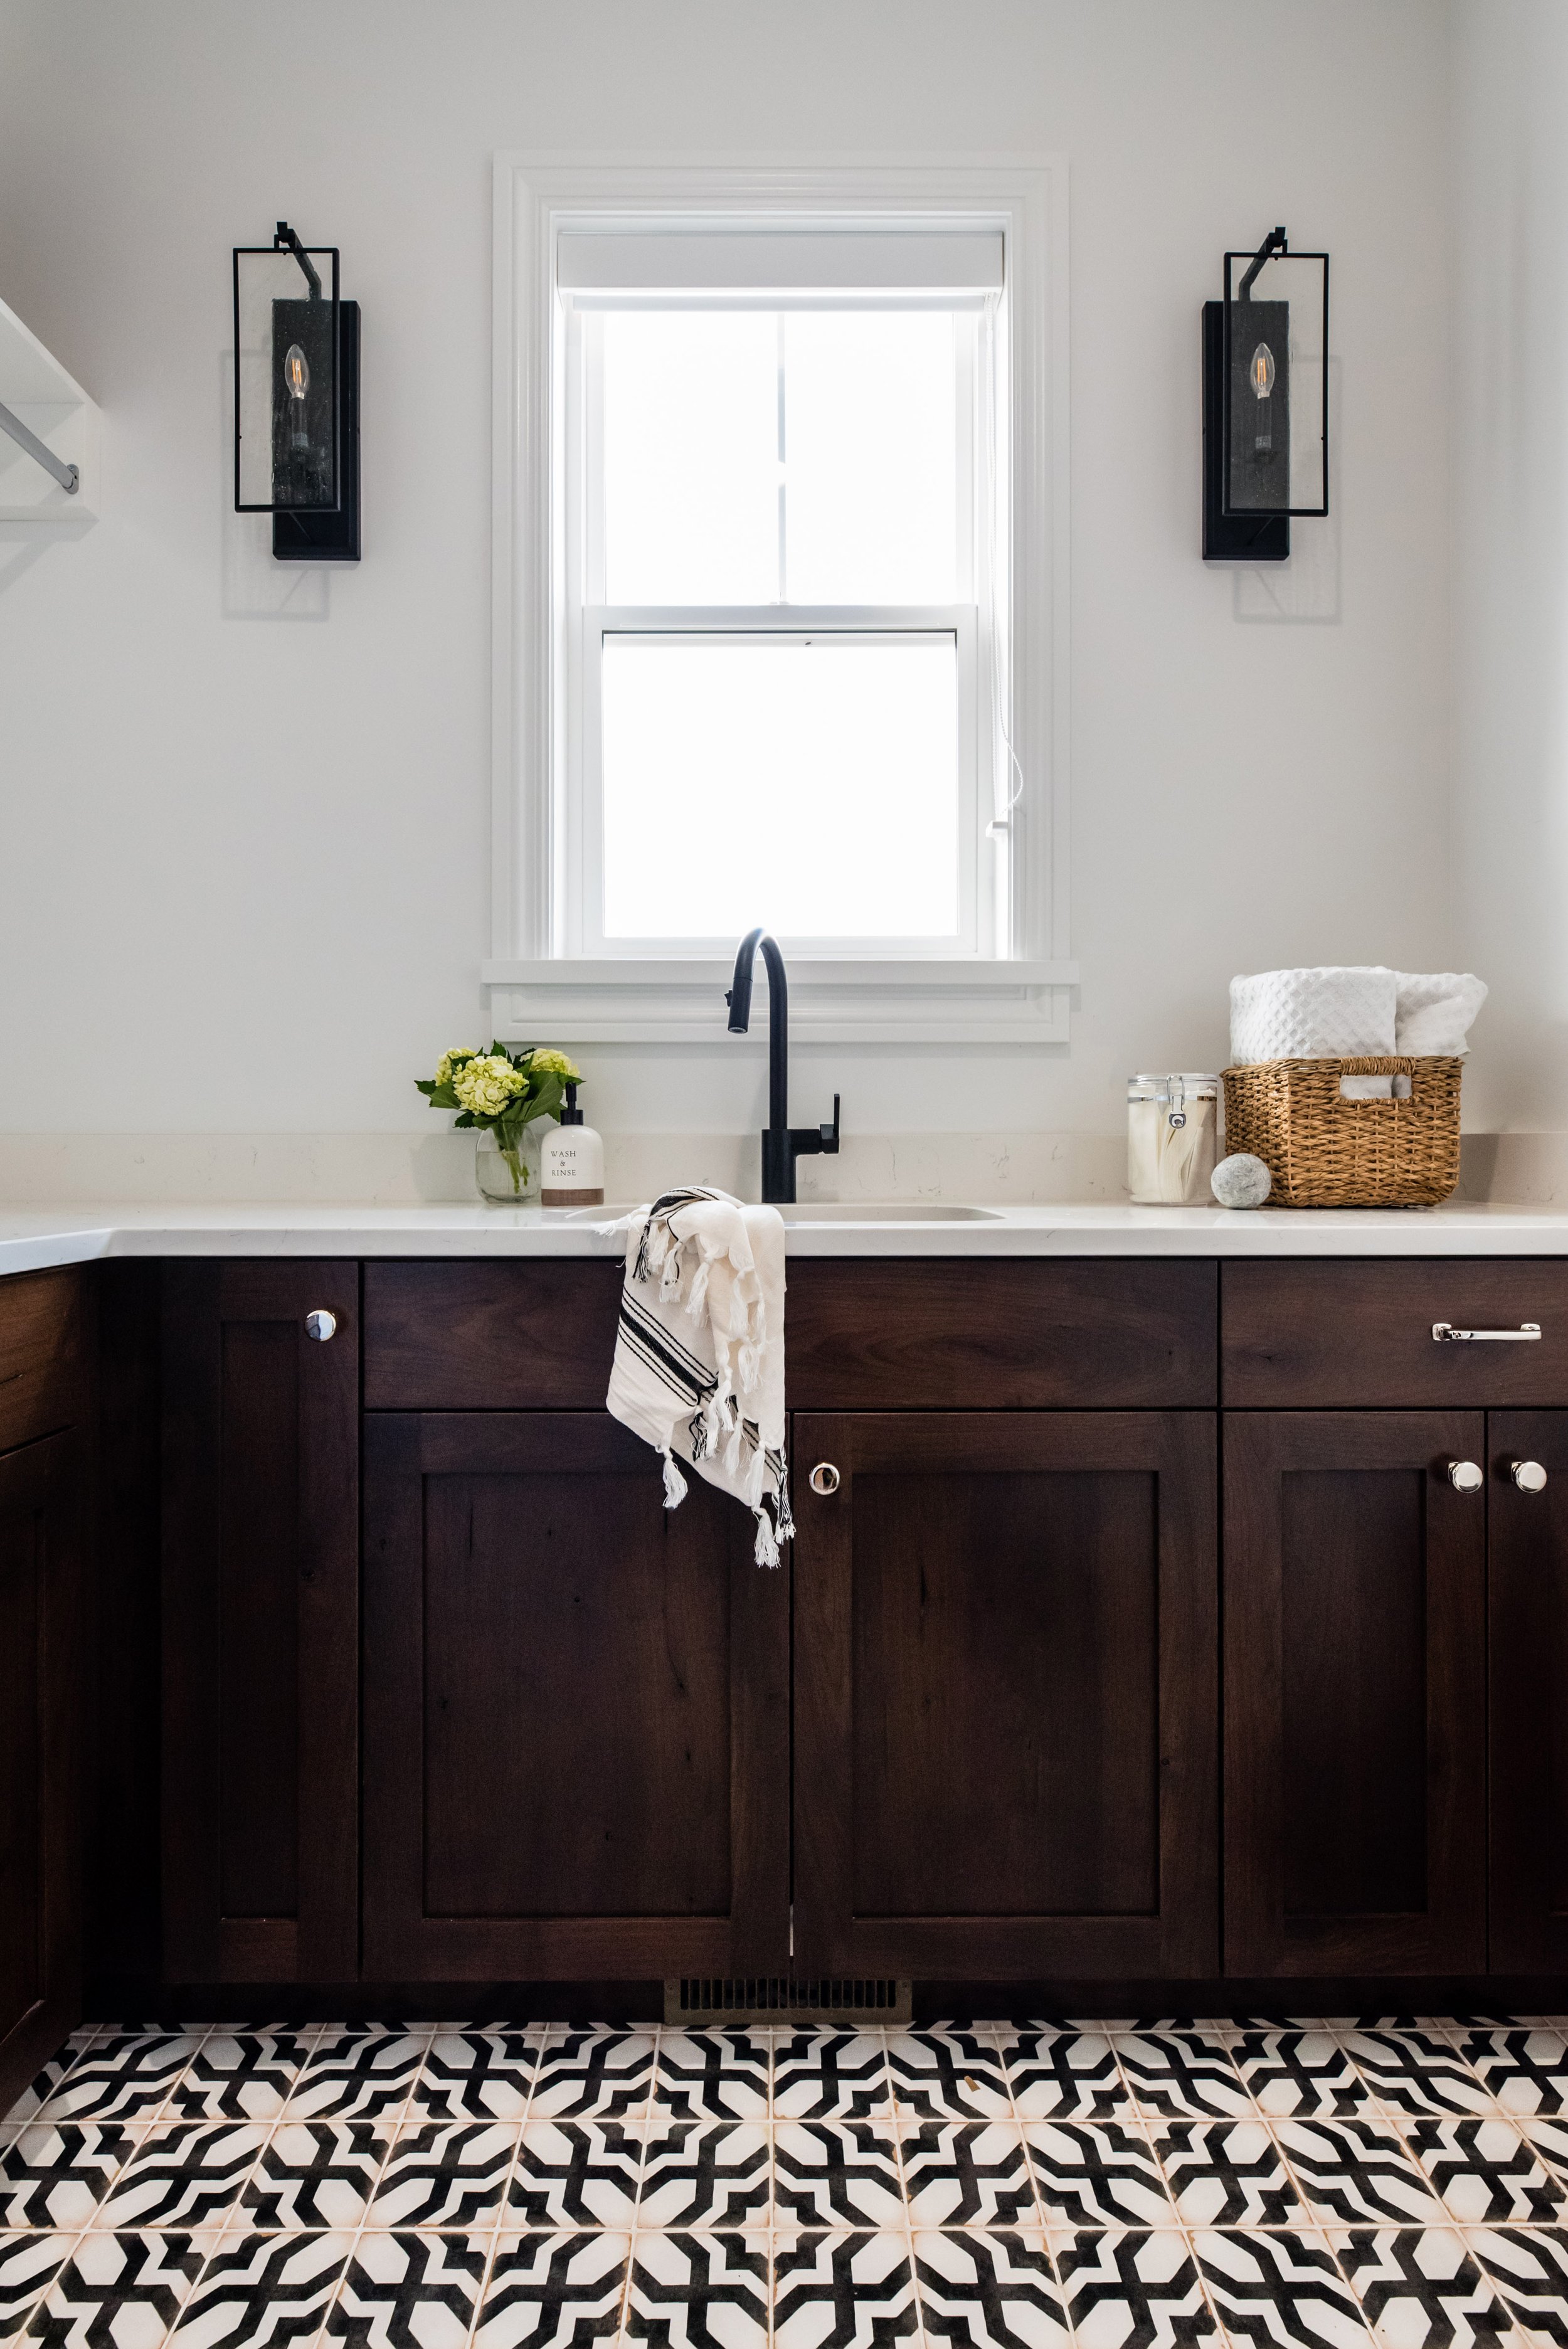  How to pick out the perfect kitchen cabinets for a modern farmhouse by Liz Powell Design. natural wood kitchen cabinets modern farmhouse kitchen #LizPowellDesign #InteriorDesignUtah #InteriorDesigner #buildingahome #cabinetry #dreamhome #interiors #